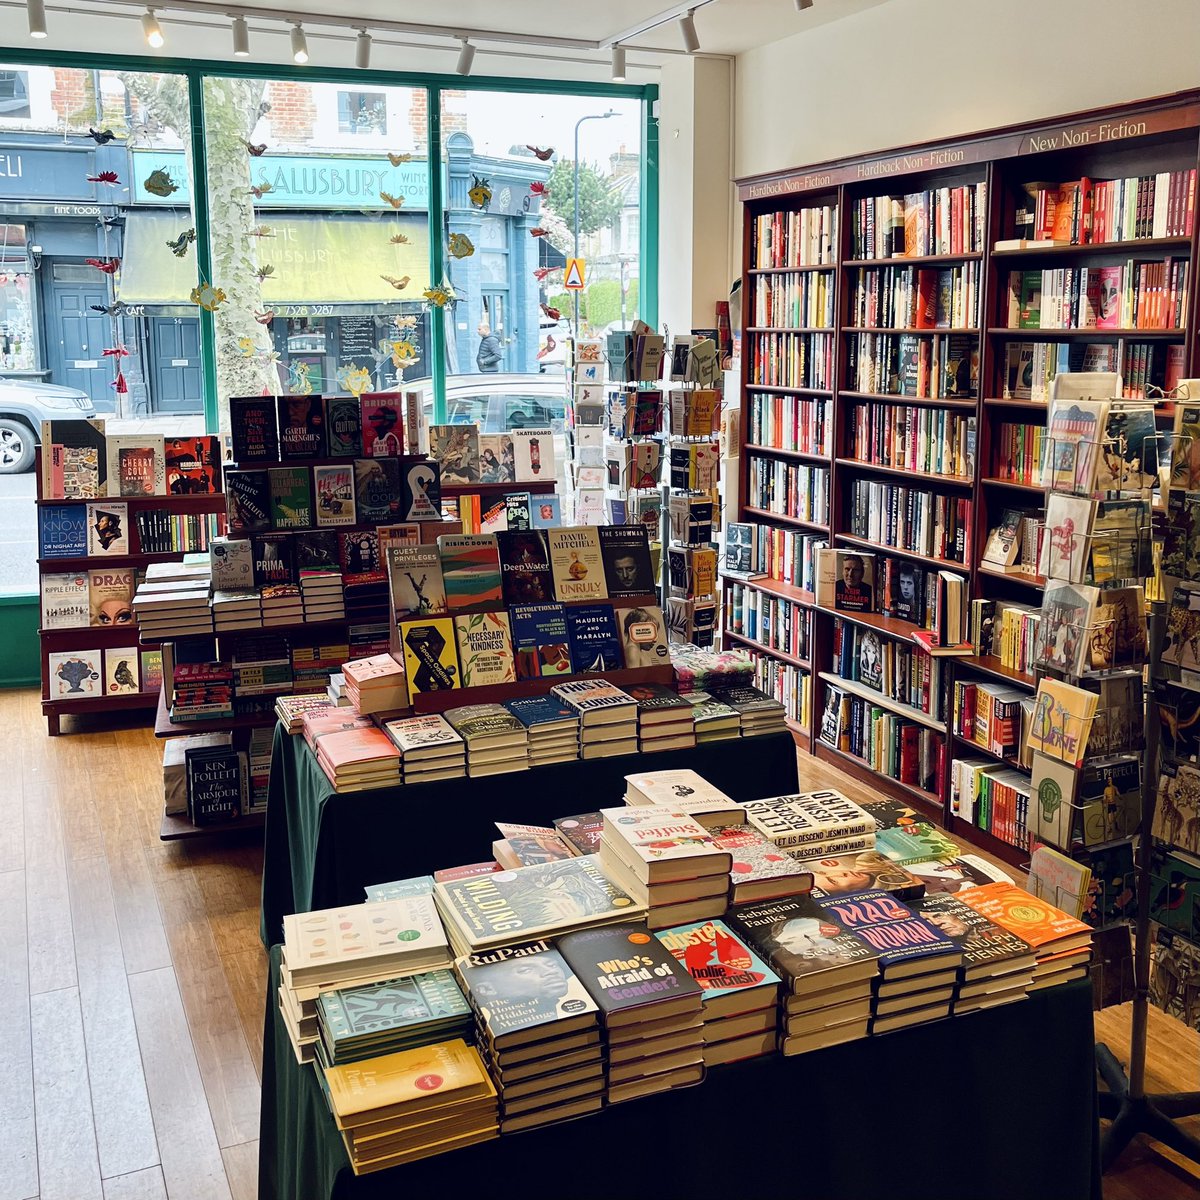 Rest assured we are open today, 10-4! Come say hey 📚🐣📚